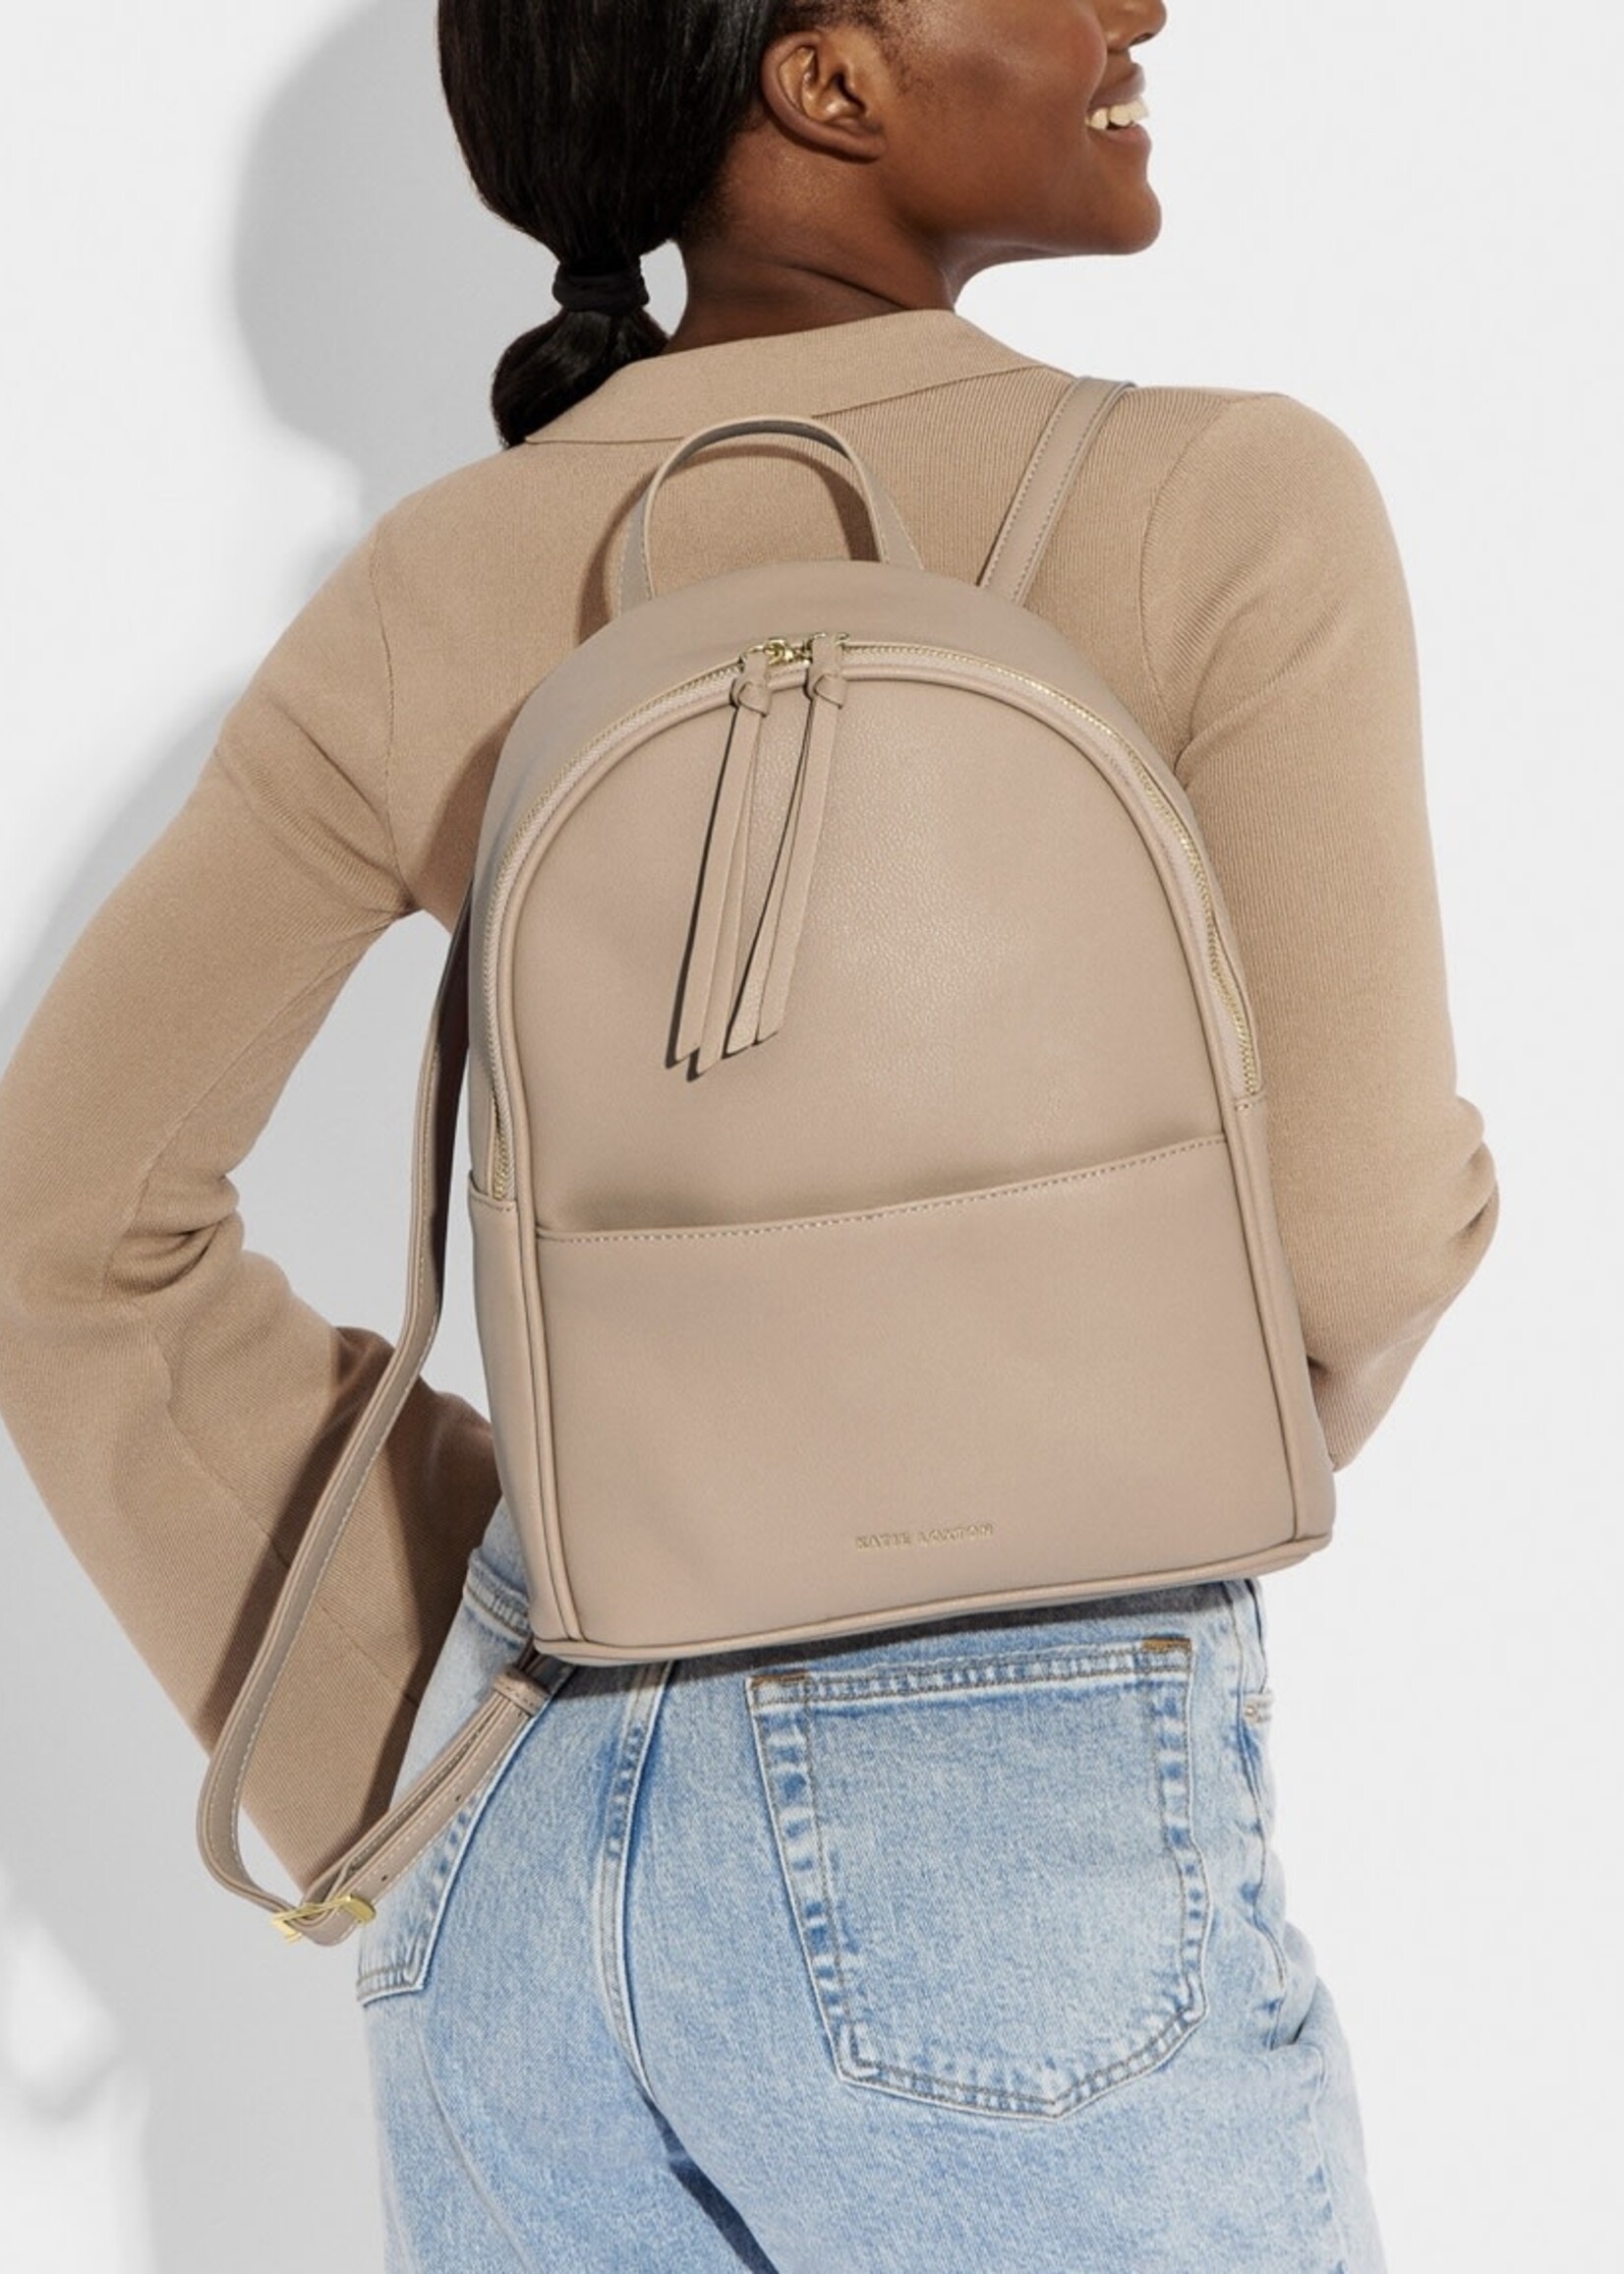 Bloom and Company Katie Loxton Soft Tan Isla Large Backpack